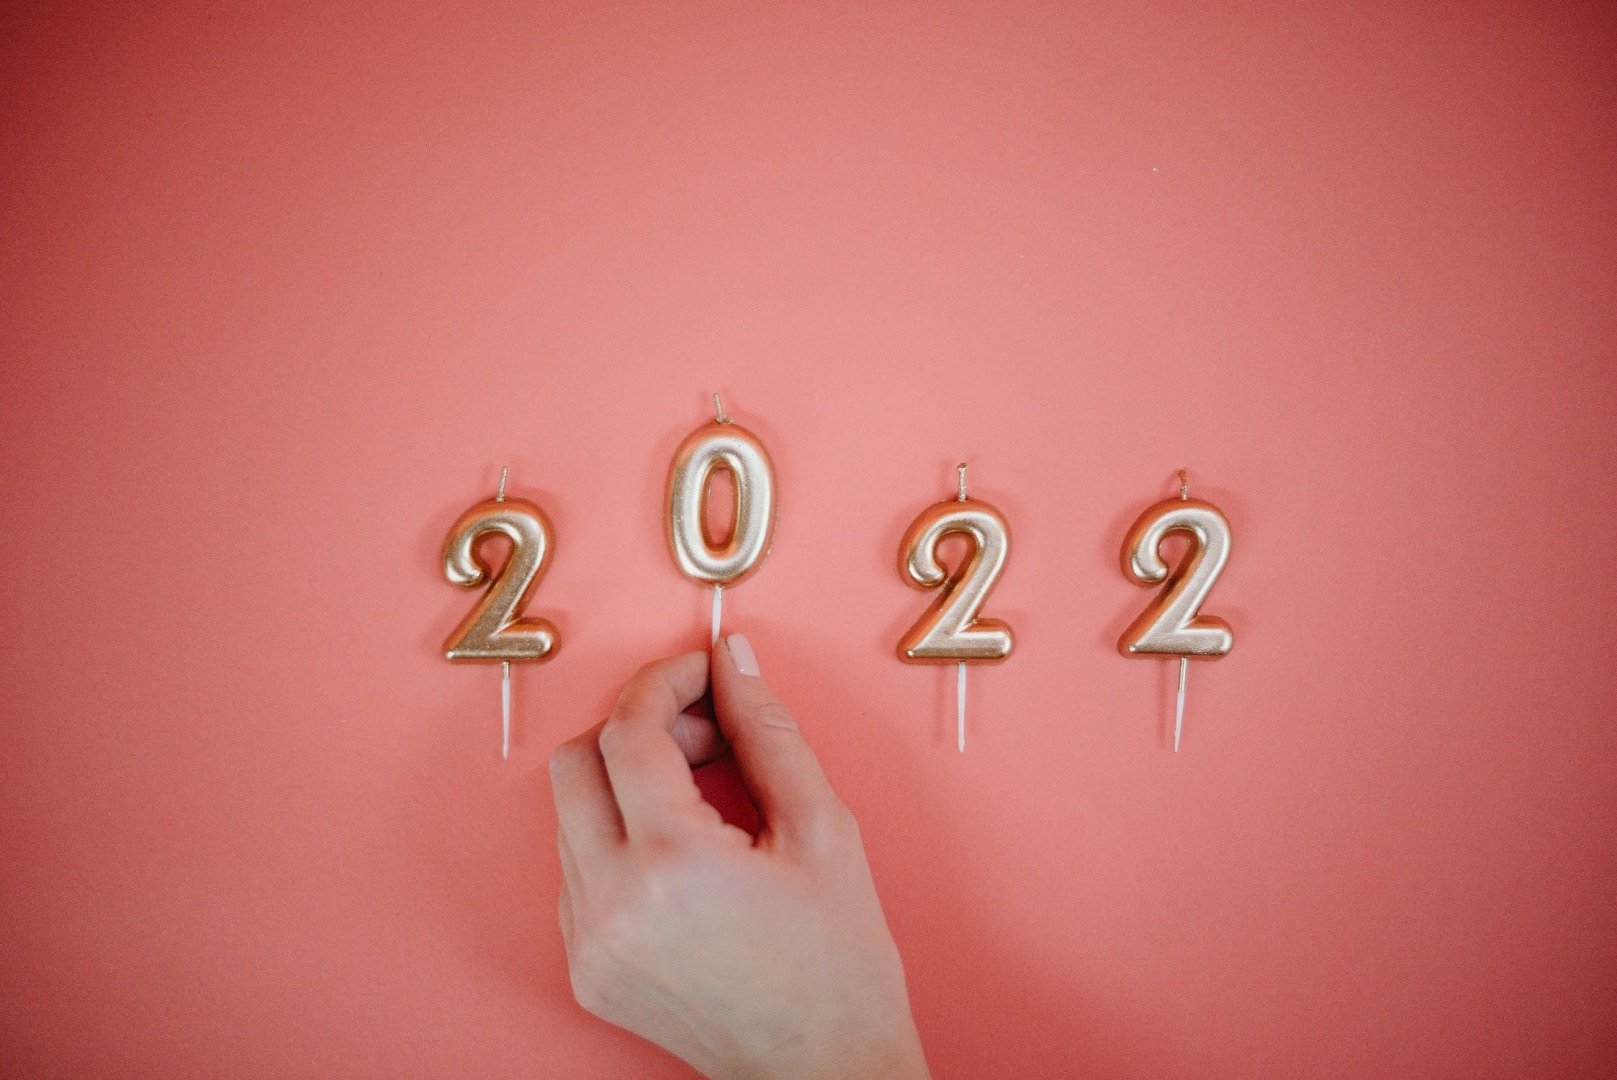 How To Upgrade Your Brand Guide For 2022